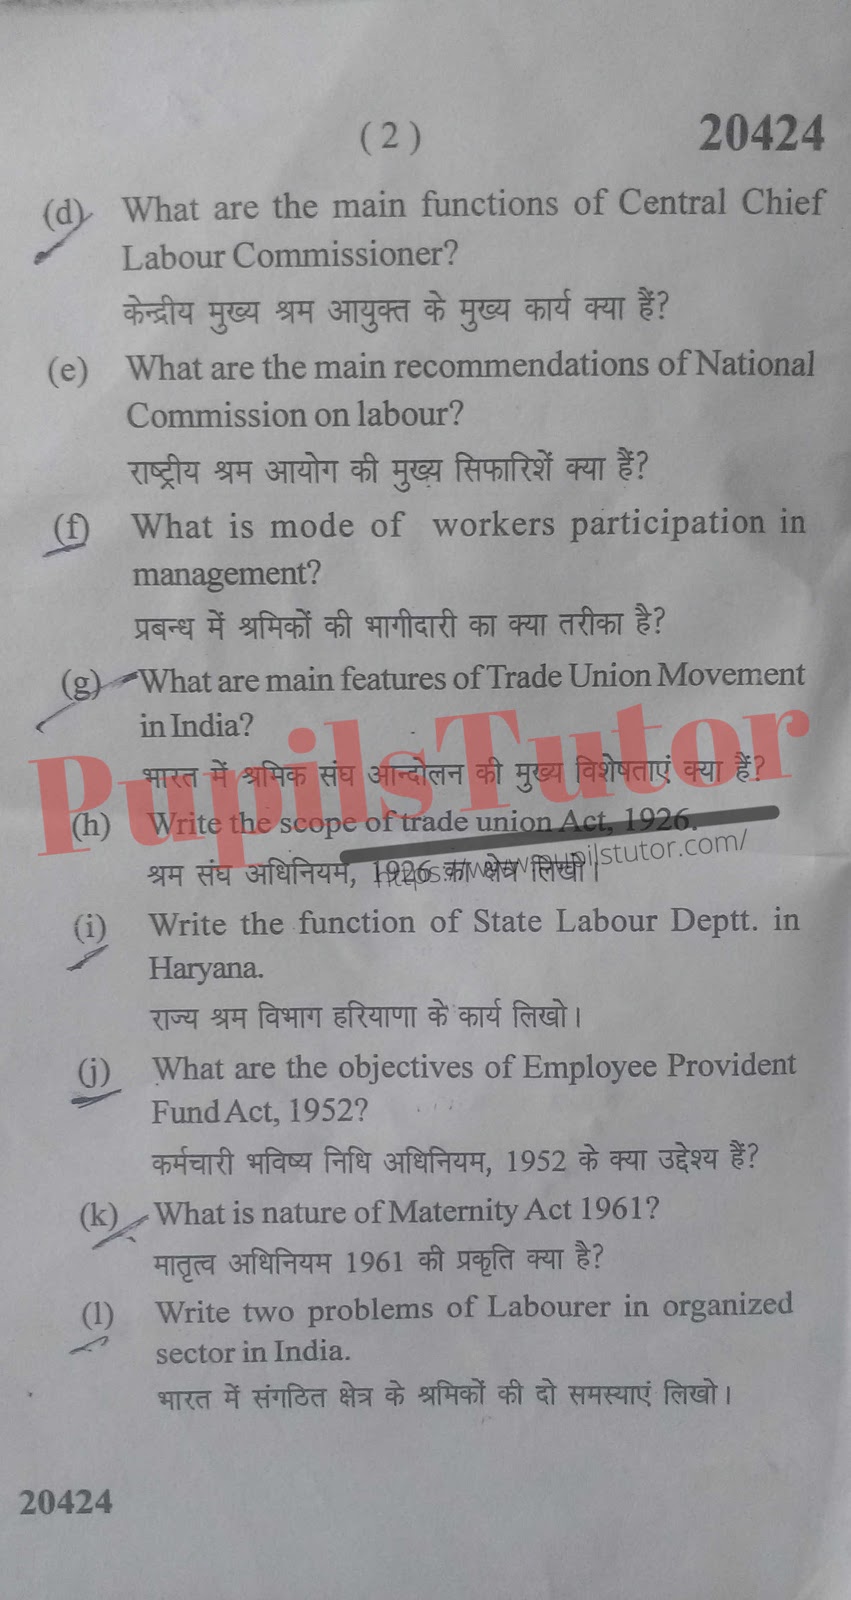 M.D. University M.A. [Public Administration] Labour Welfare Administration First Year Important Question Answer And Solution - www.pupilstutor.com (Paper Page Number 2)